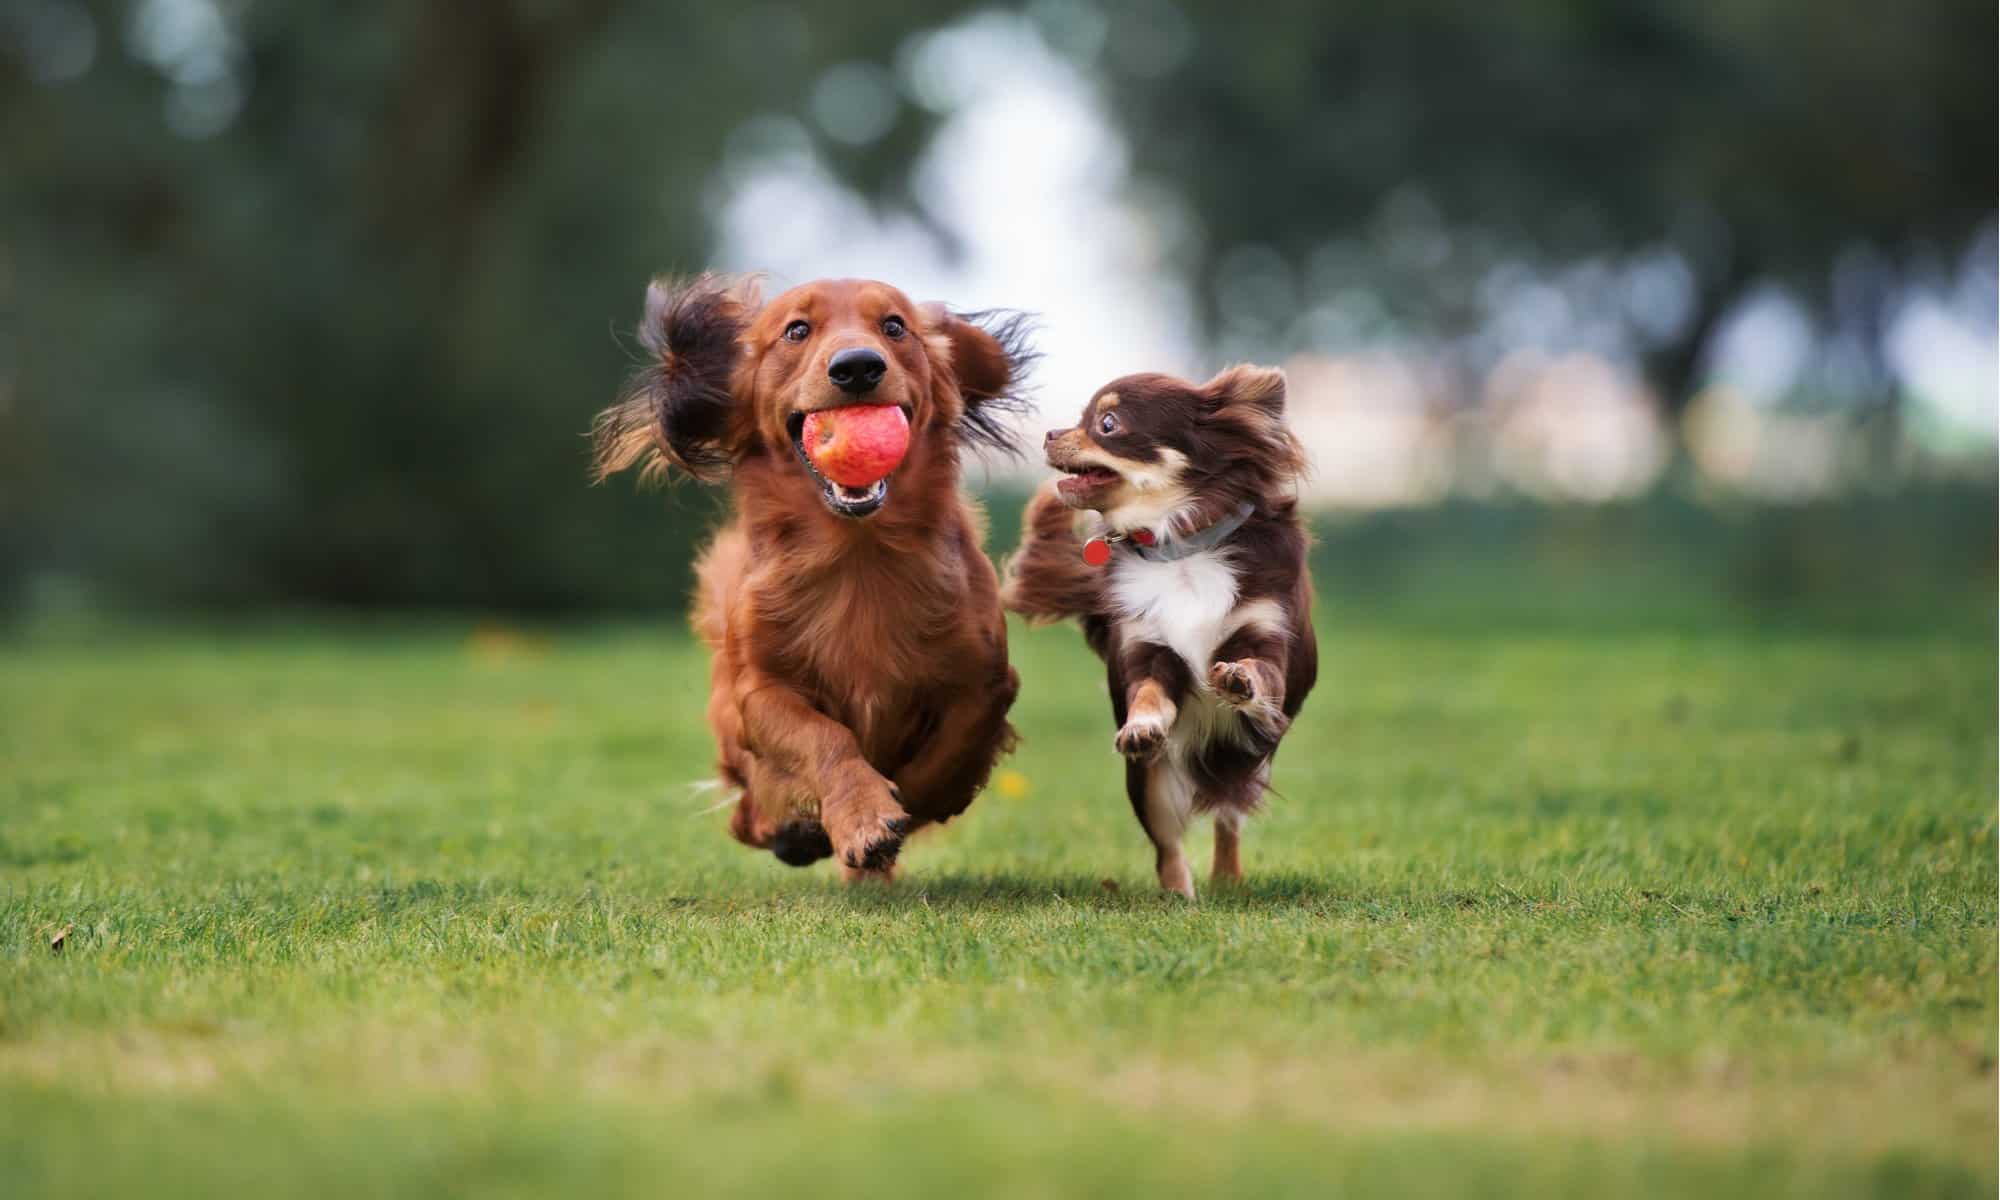 Dog Park Series - Two Small Dogs